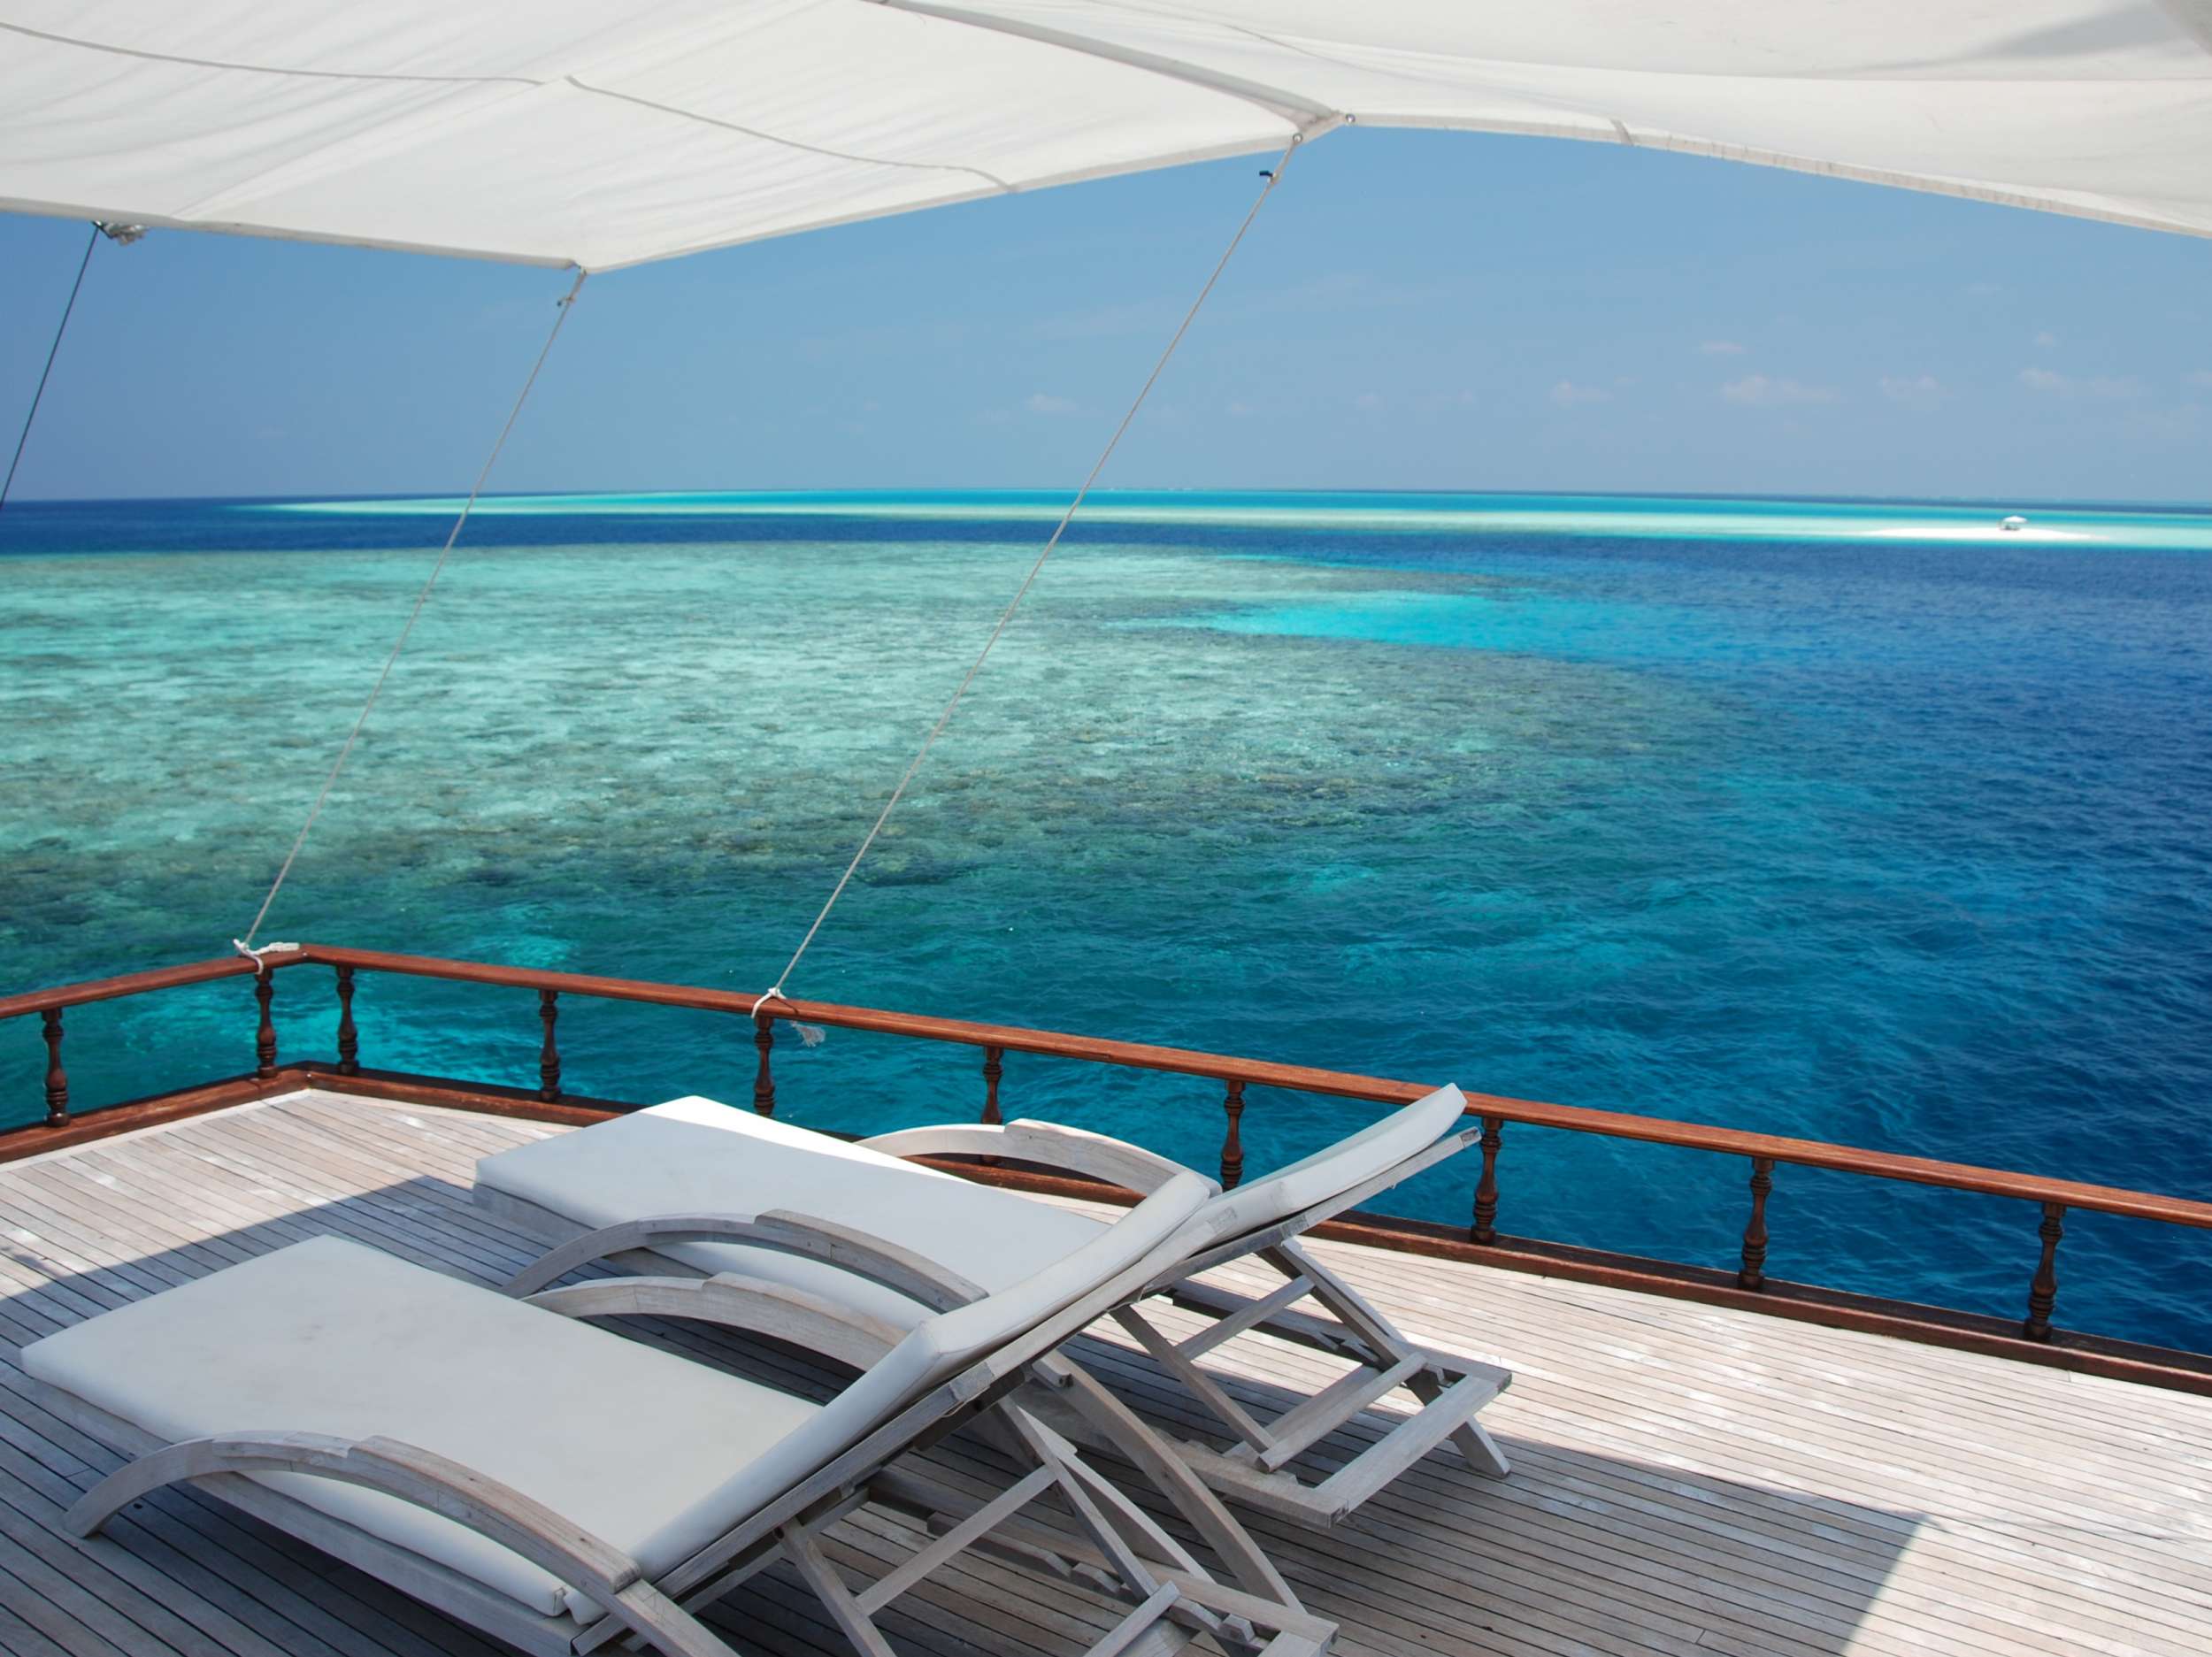 DHONI STELLA 2 - Luxury yacht charter Maldives & Boat hire in Indian Ocean & SE Asia 5